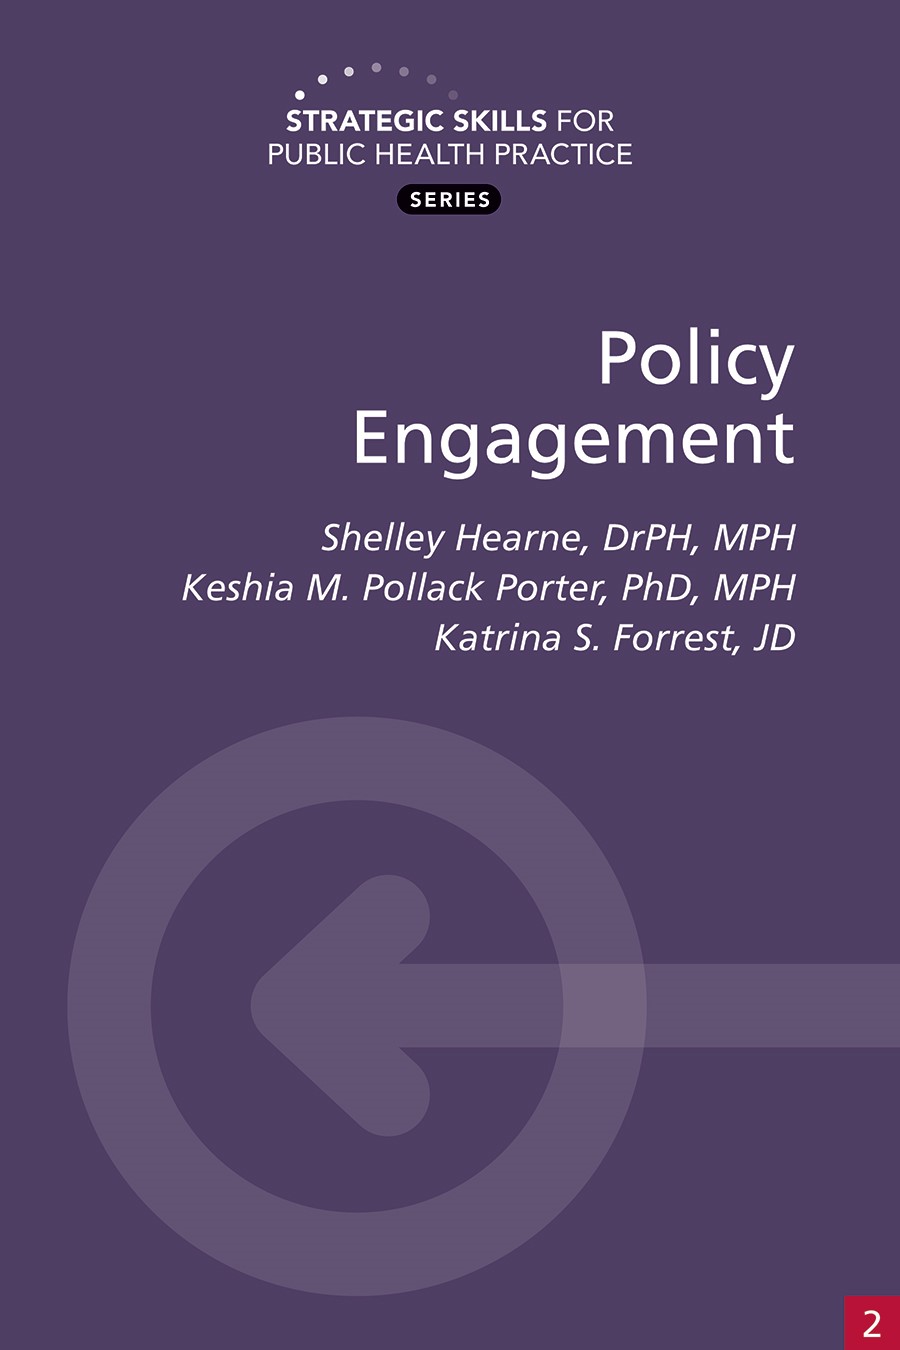 Policy Engagement